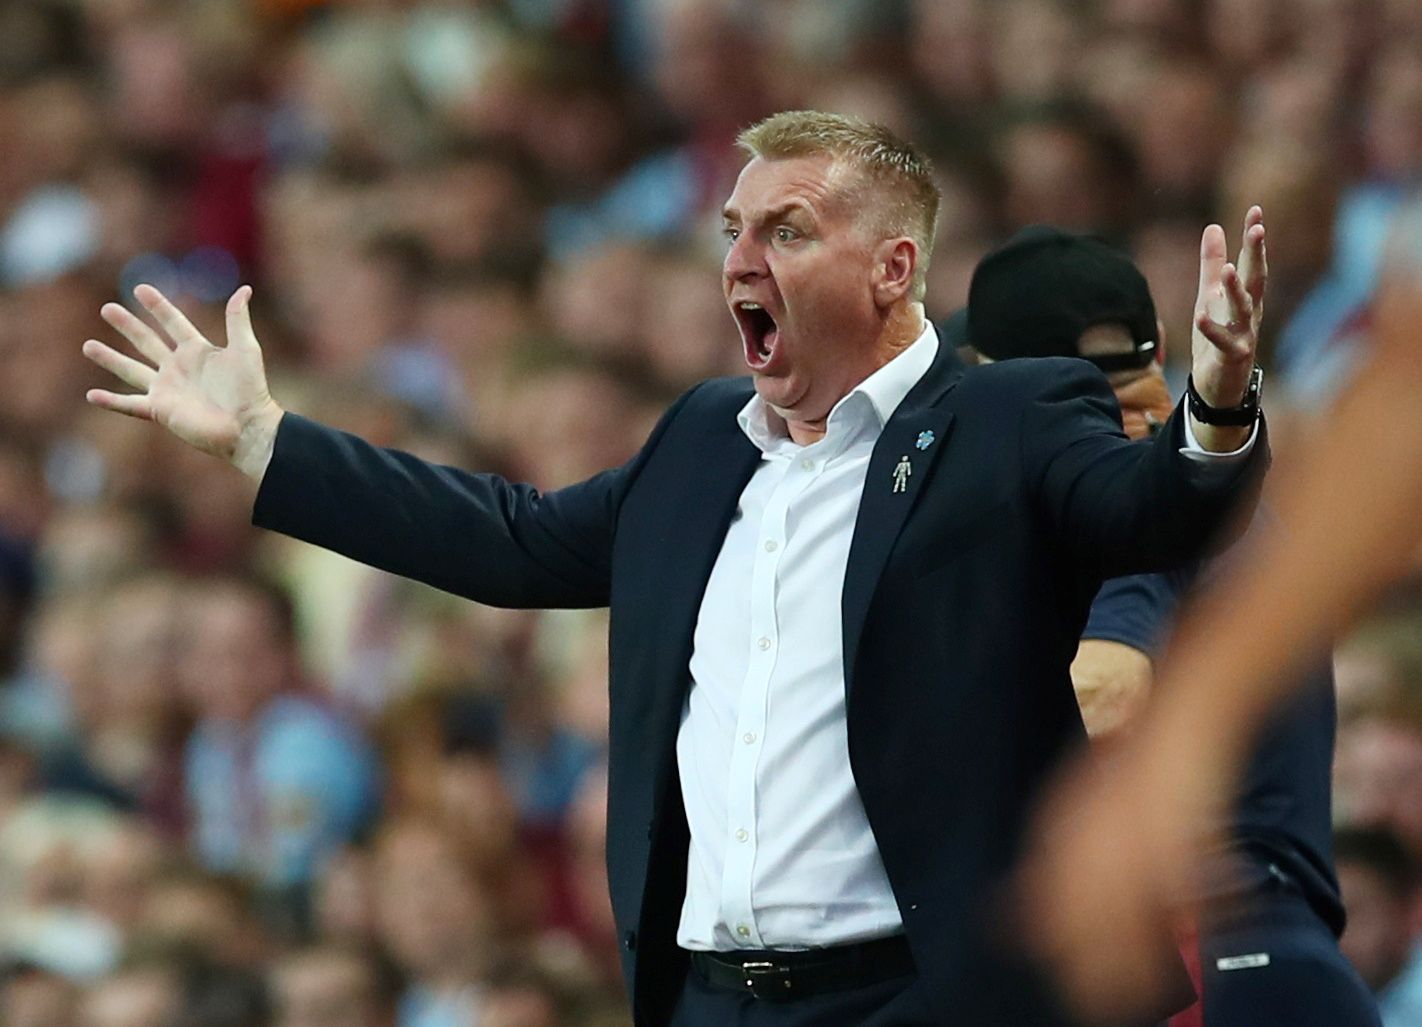 Soccer Football - Premier League - Aston Villa v Everton - Villa Park, Birmingham, Britain - August 23, 2019  Aston Villa manager Dean Smith reacts  REUTERS/Eddie Keogh  EDITORIAL USE ONLY. No use with unauthorized audio, video, data, fixture lists, club/league logos or 